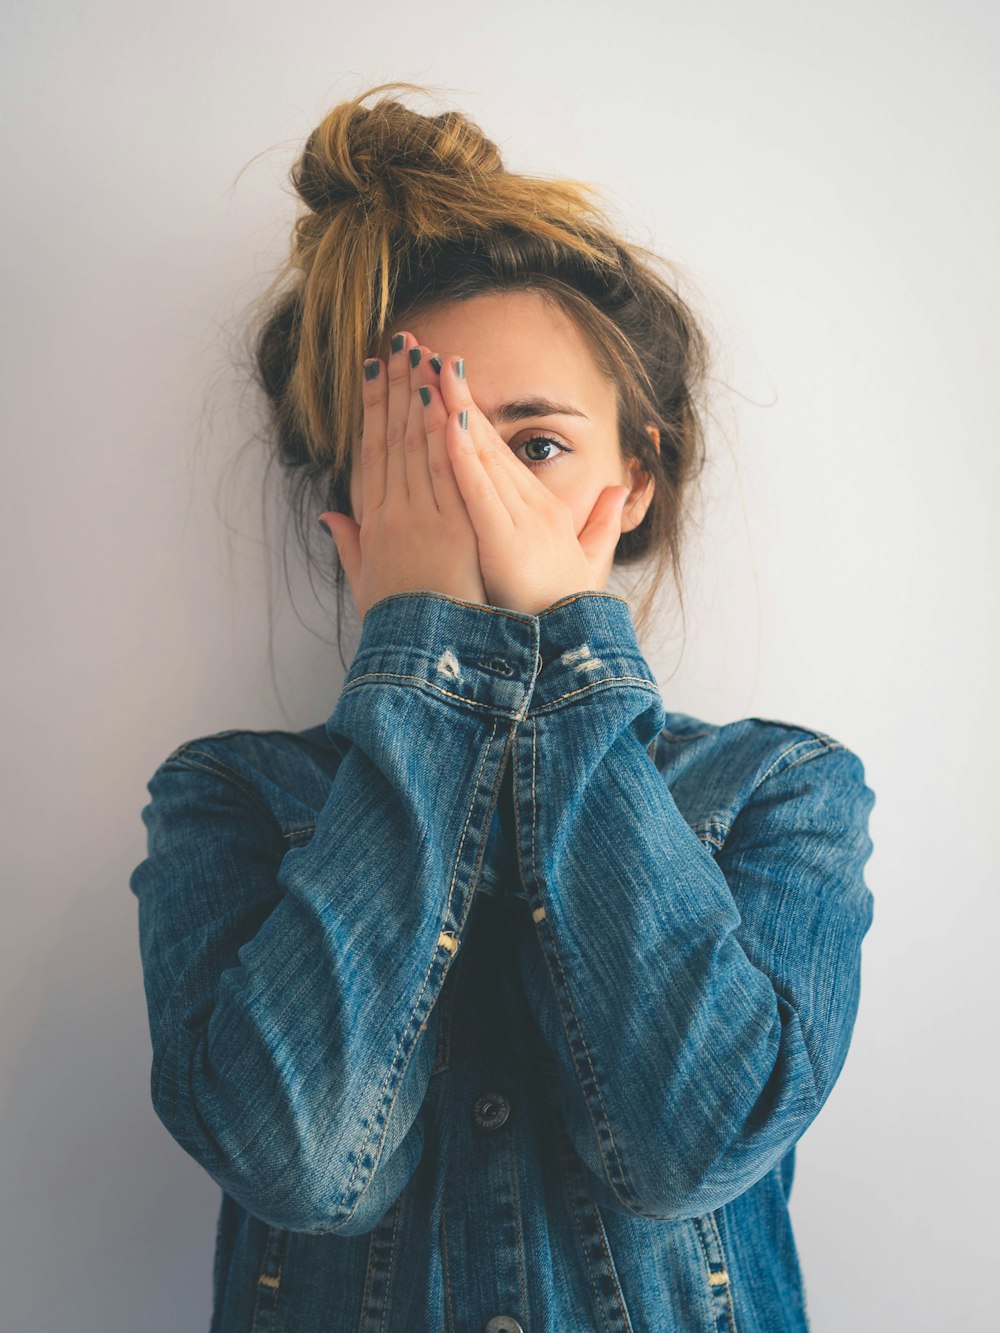 Hiding Face Pictures Download Free Images On Unsplash Awesome hidden face dps for girls hidden face dp poses hidden face photo poses. hiding face pictures download free